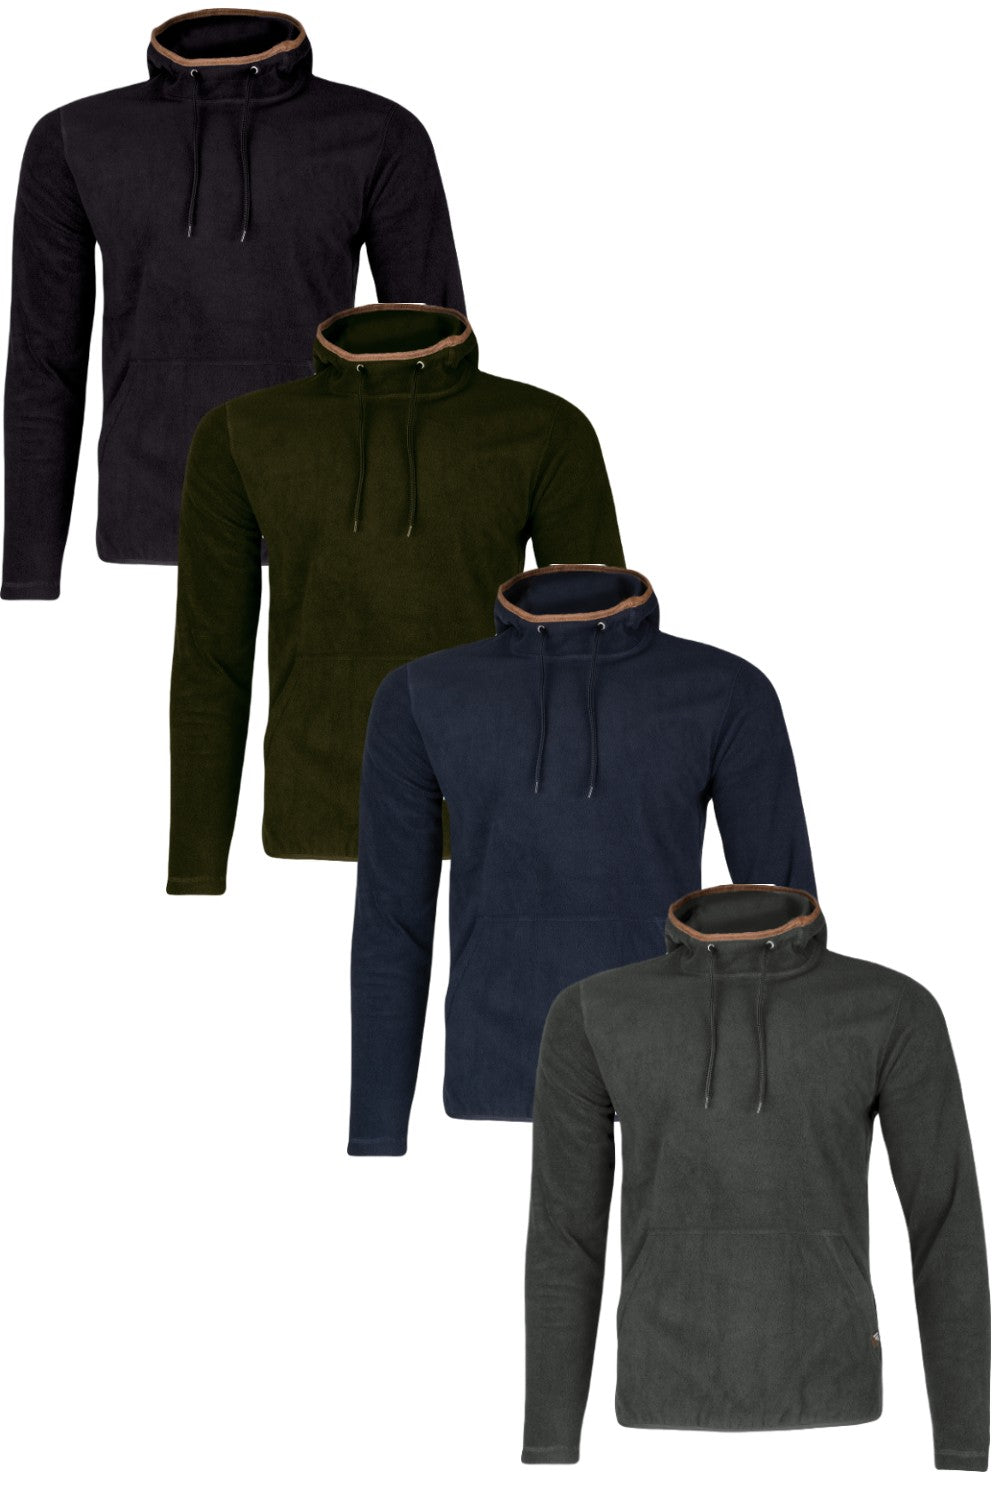 Jack Pyke Country Fleece Hoodie In Anthracite, Charcoal, Dark Olive &amp; Navy 